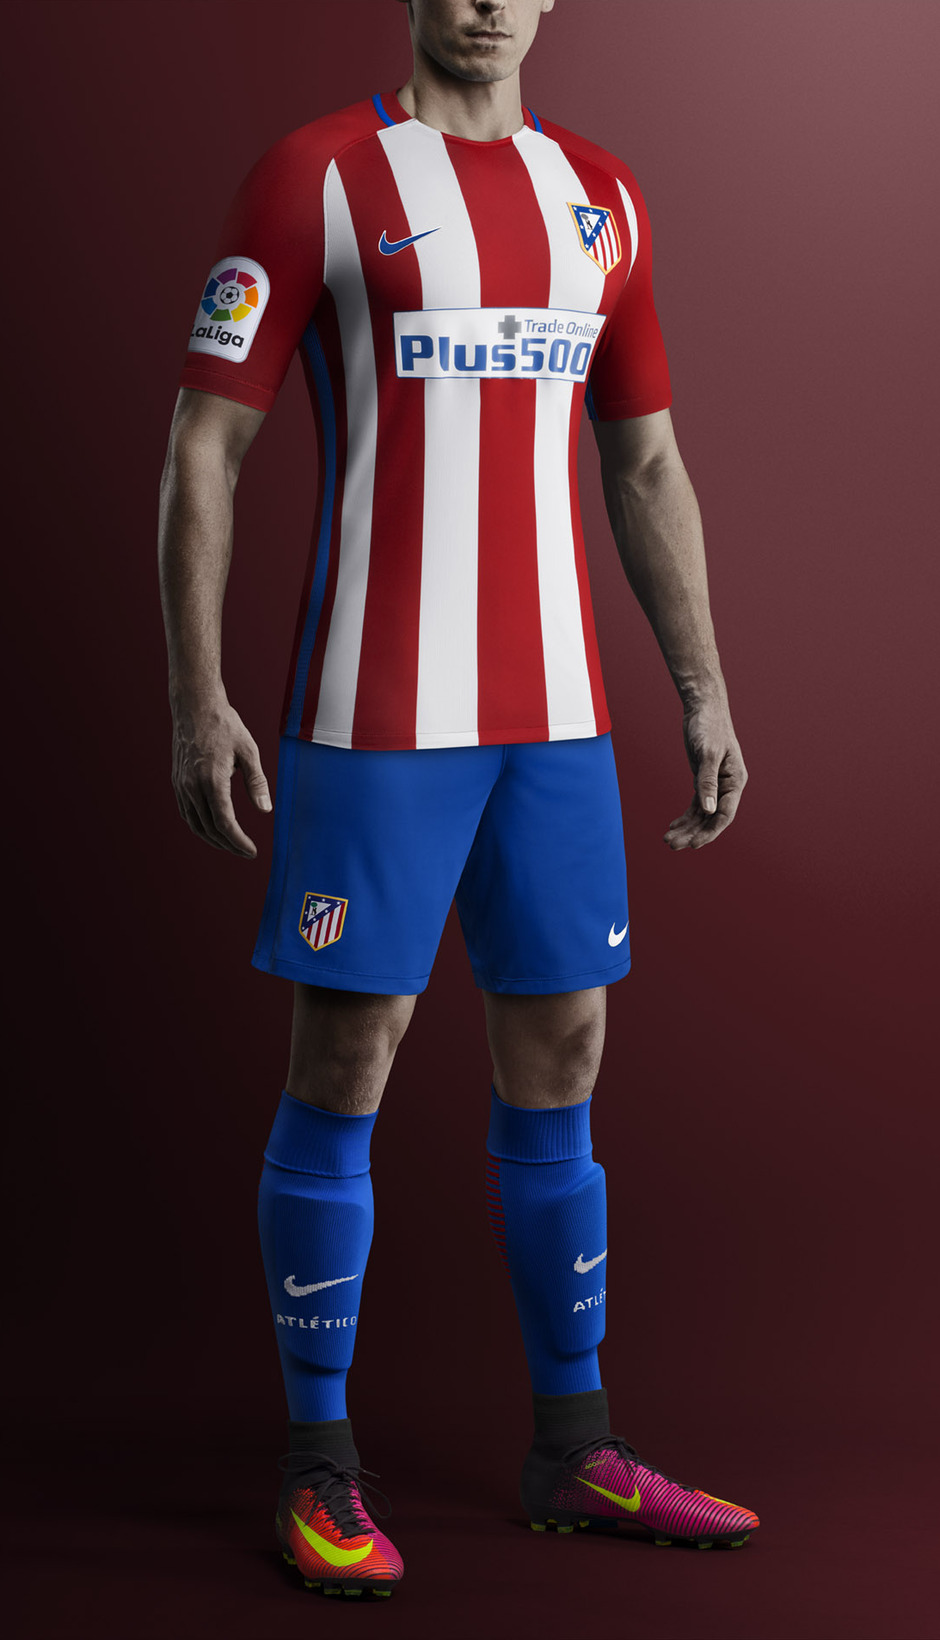 Club de Madrid - The home kit, inspired in opening season of the